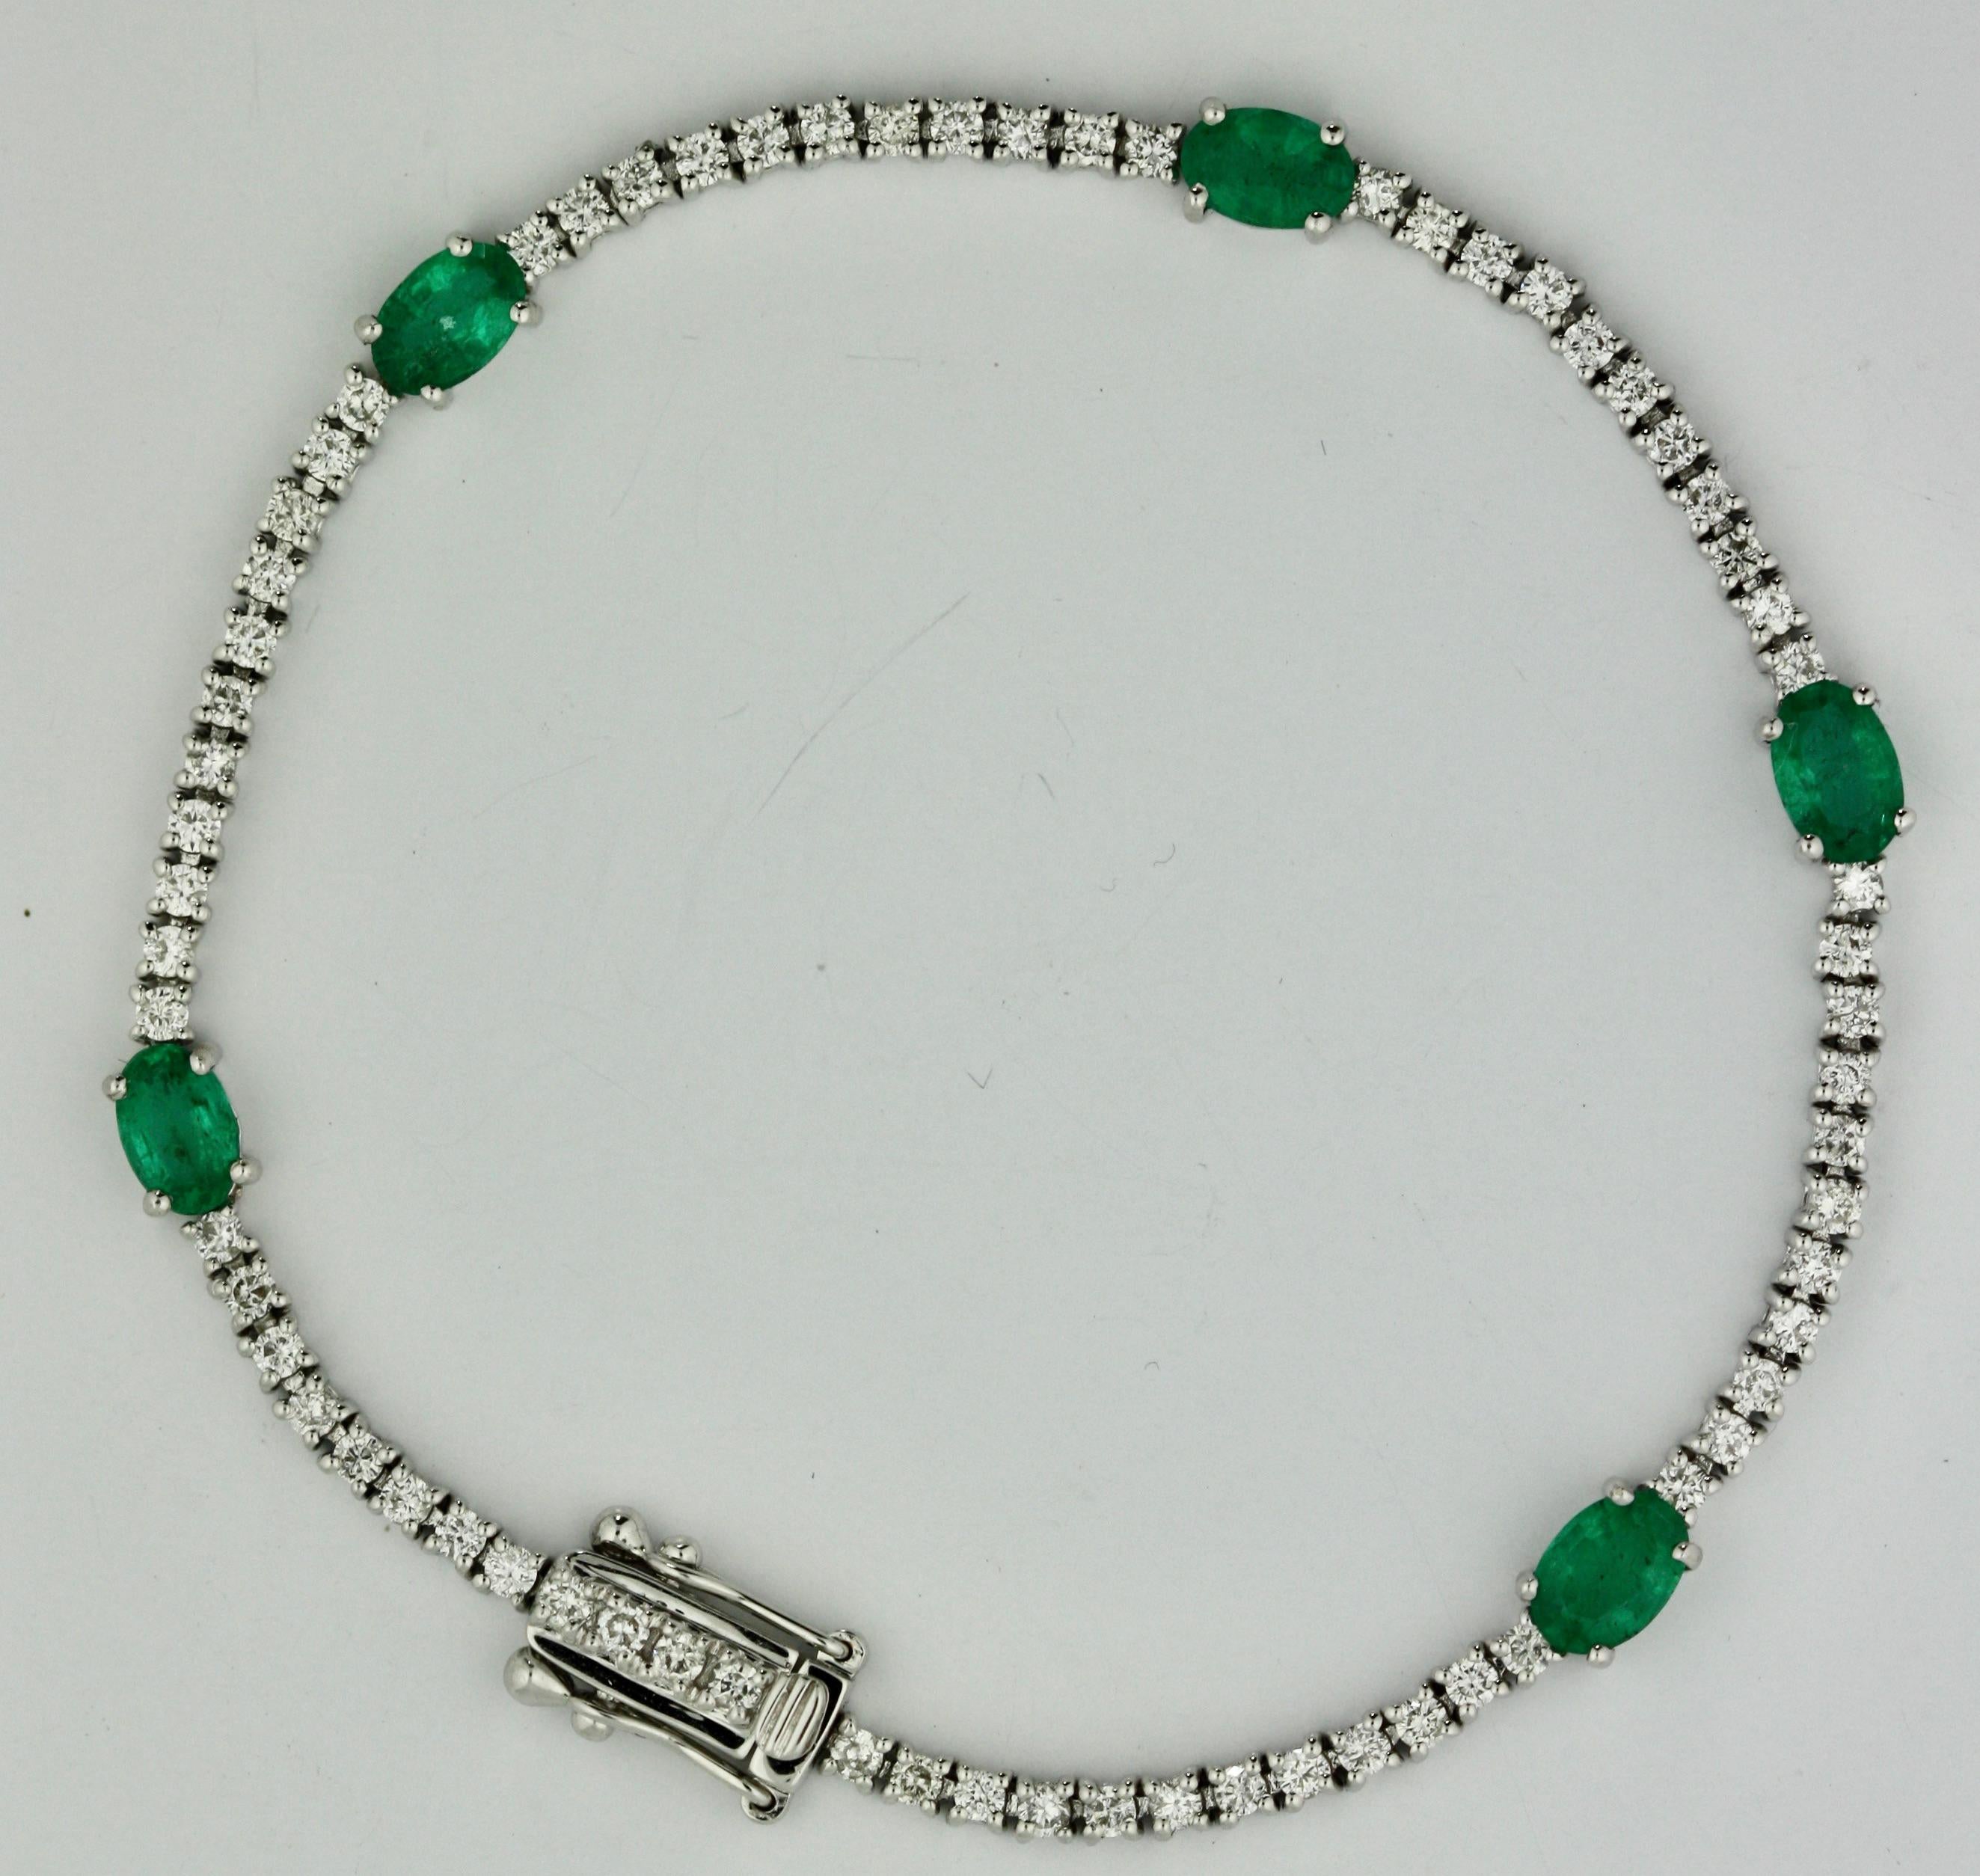 
Emerald and Diamond Bracelet mounted in 18 karat white gold, 7 1/4 inches 
Accompanied by AIGL Appraisal K49E65-EA13018 
Stating: 
18K White gold bracelet mounted with 5 genuine faceted emeralds weighing approximately 1.95 cts., and 68 genuine